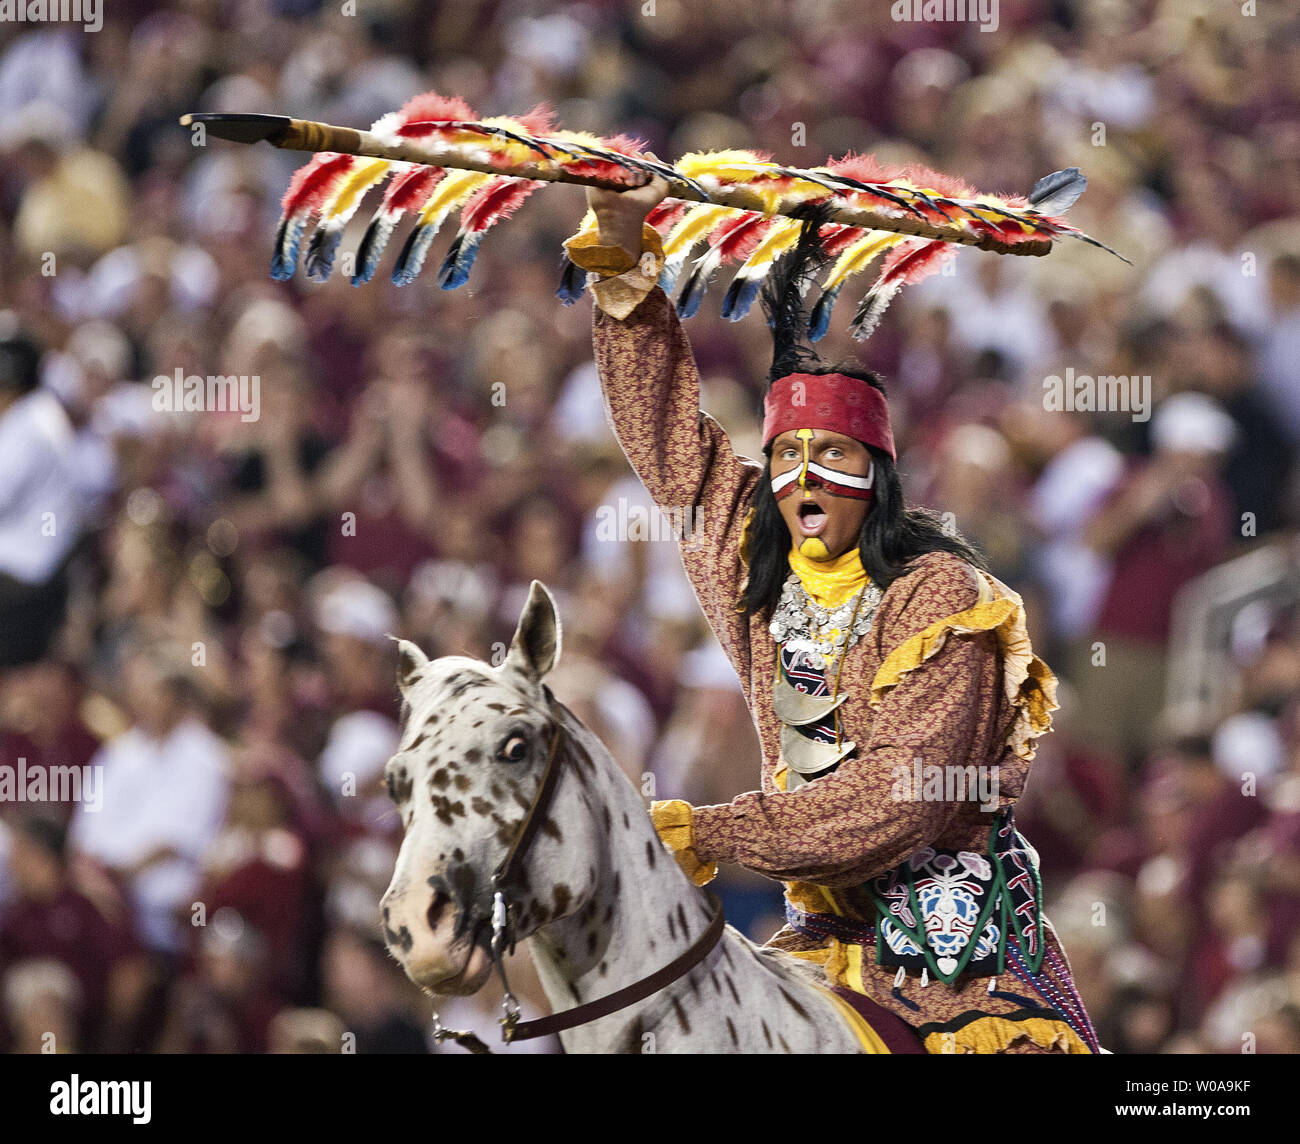 Florida State Seminoles mascot Osceola atop Renegade rally the fans against  Oklahoma in the 1st half of their NCAA football game in Tallahassee, Florida Sept 17, 2011.  The Oklahoma Sooners defeated the Florida State Sminoles 23-13.  UPI/Mark Wallheiser Stock Photo